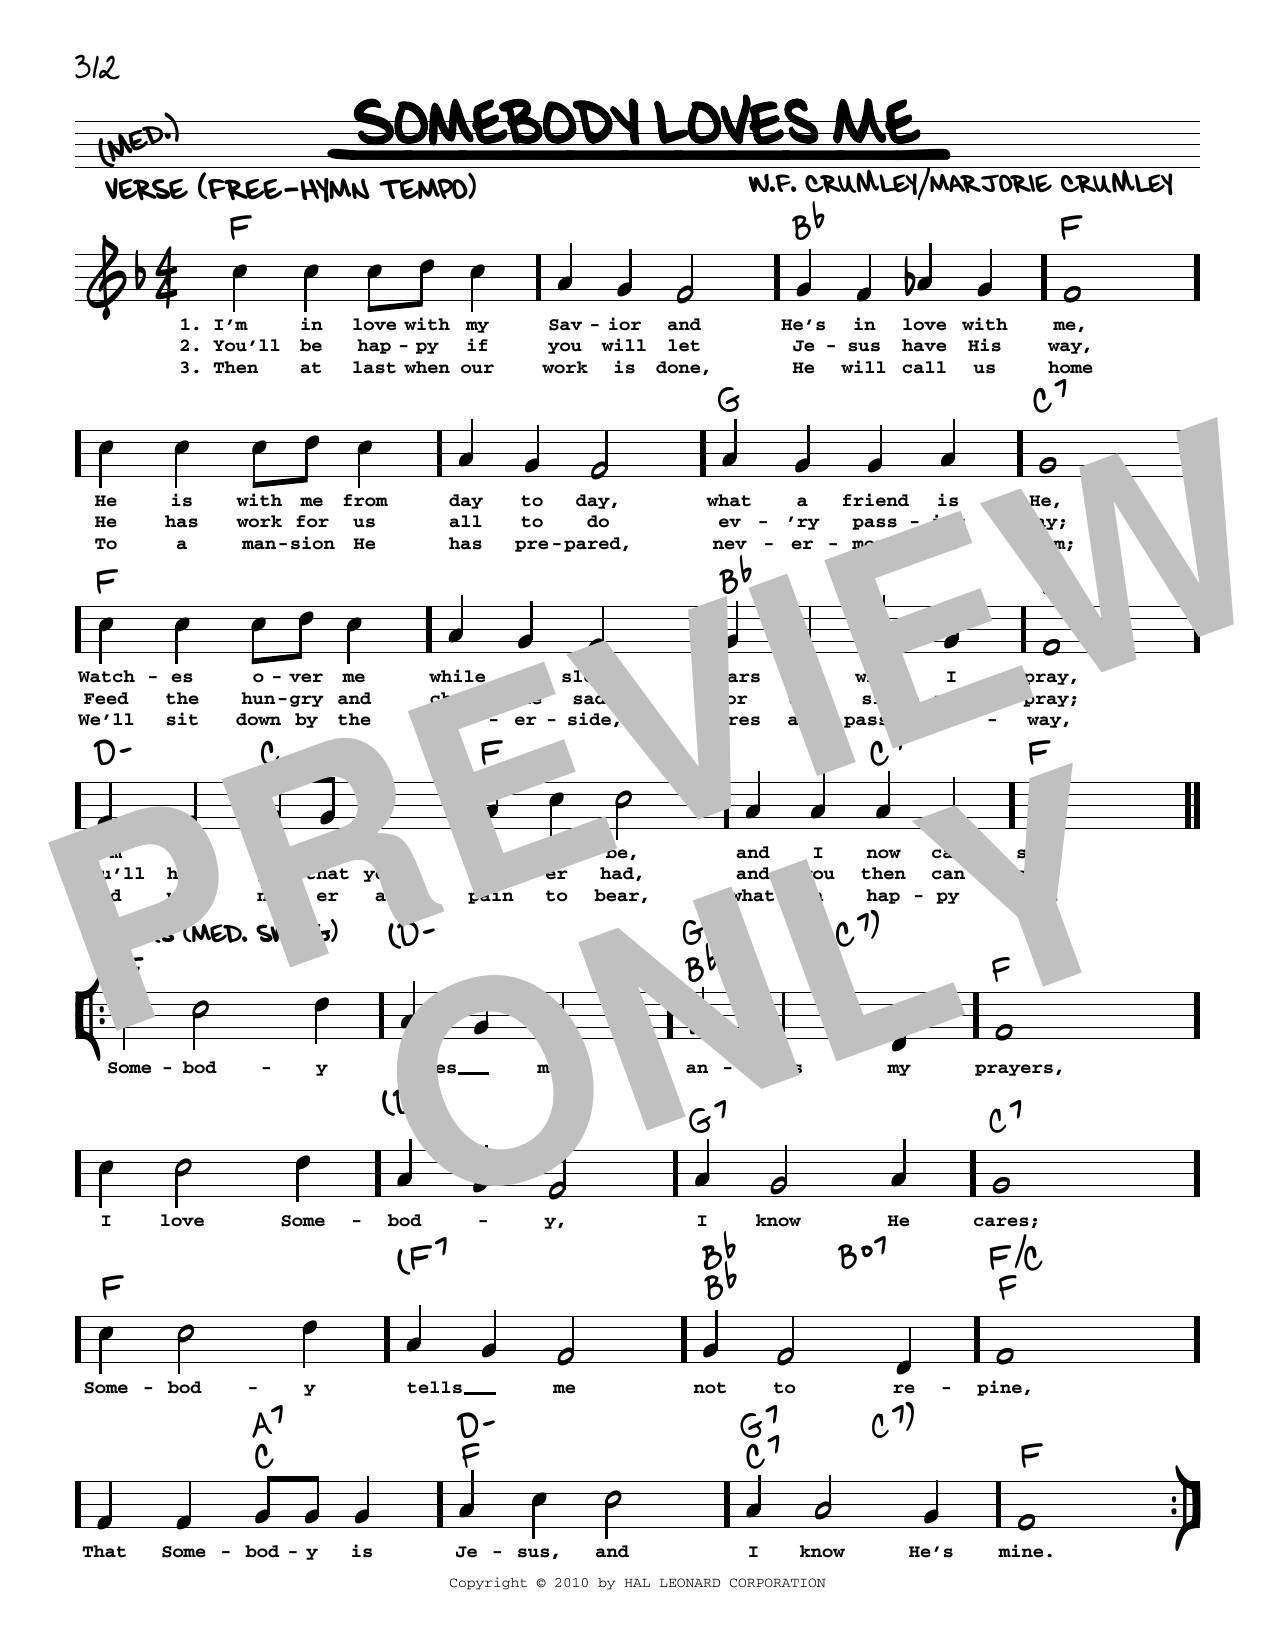 Download W.F. and Marjorie Crumley Somebody Loves Me (arr. Robert Rawlins) Sheet Music